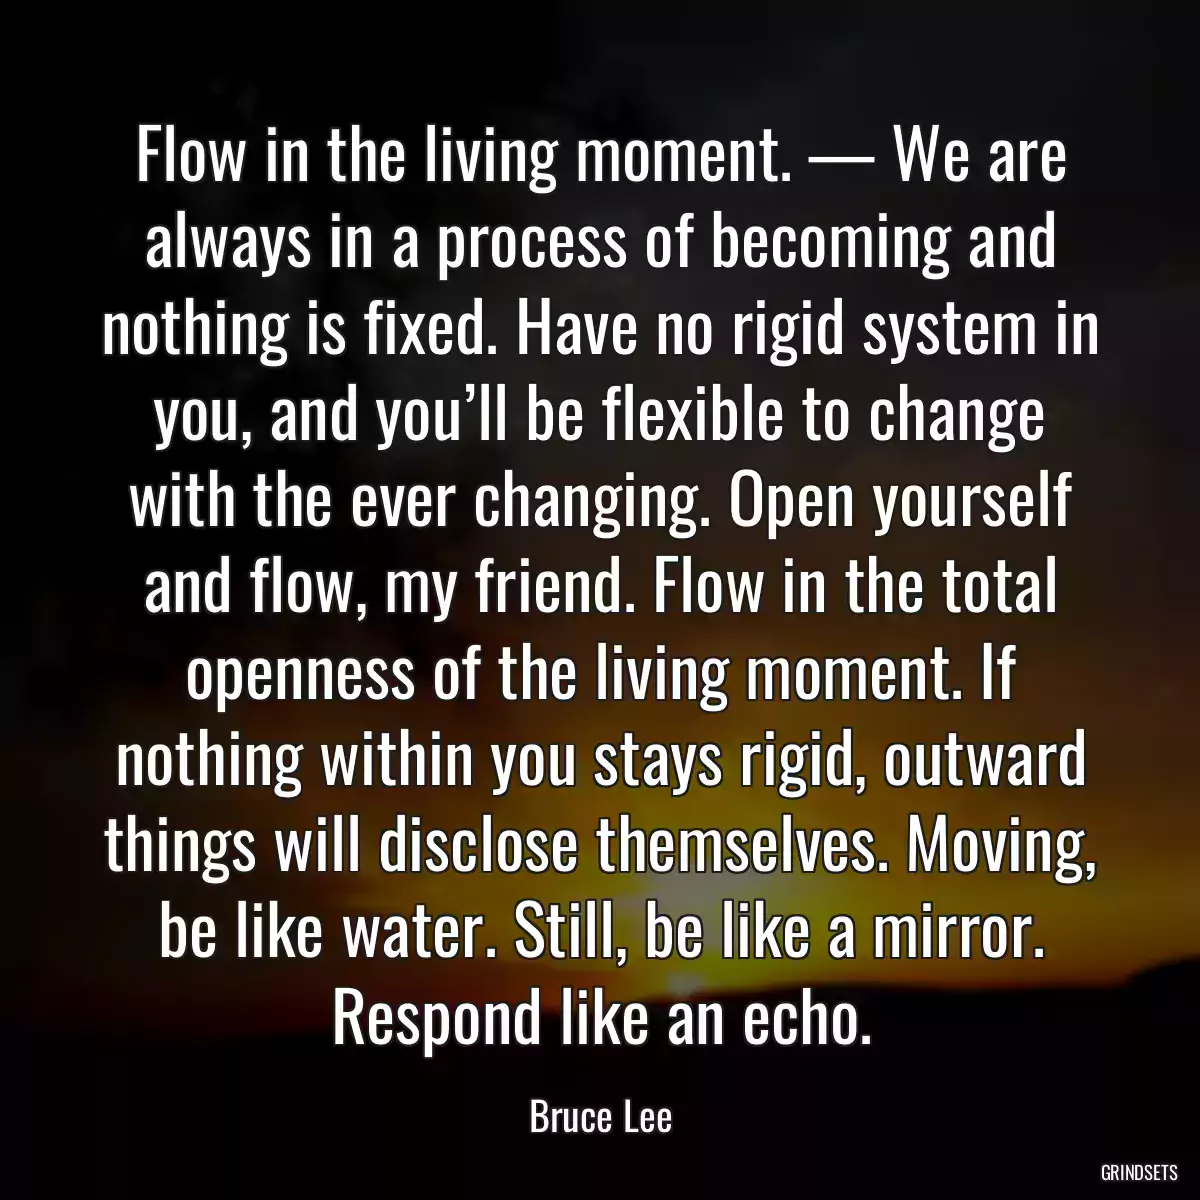 Flow in the living moment. — We are always in a process of becoming and nothing is fixed. Have no rigid system in you, and you’ll be flexible to change with the ever changing. Open yourself and flow, my friend. Flow in the total openness of the living moment. If nothing within you stays rigid, outward things will disclose themselves. Moving, be like water. Still, be like a mirror. Respond like an echo.